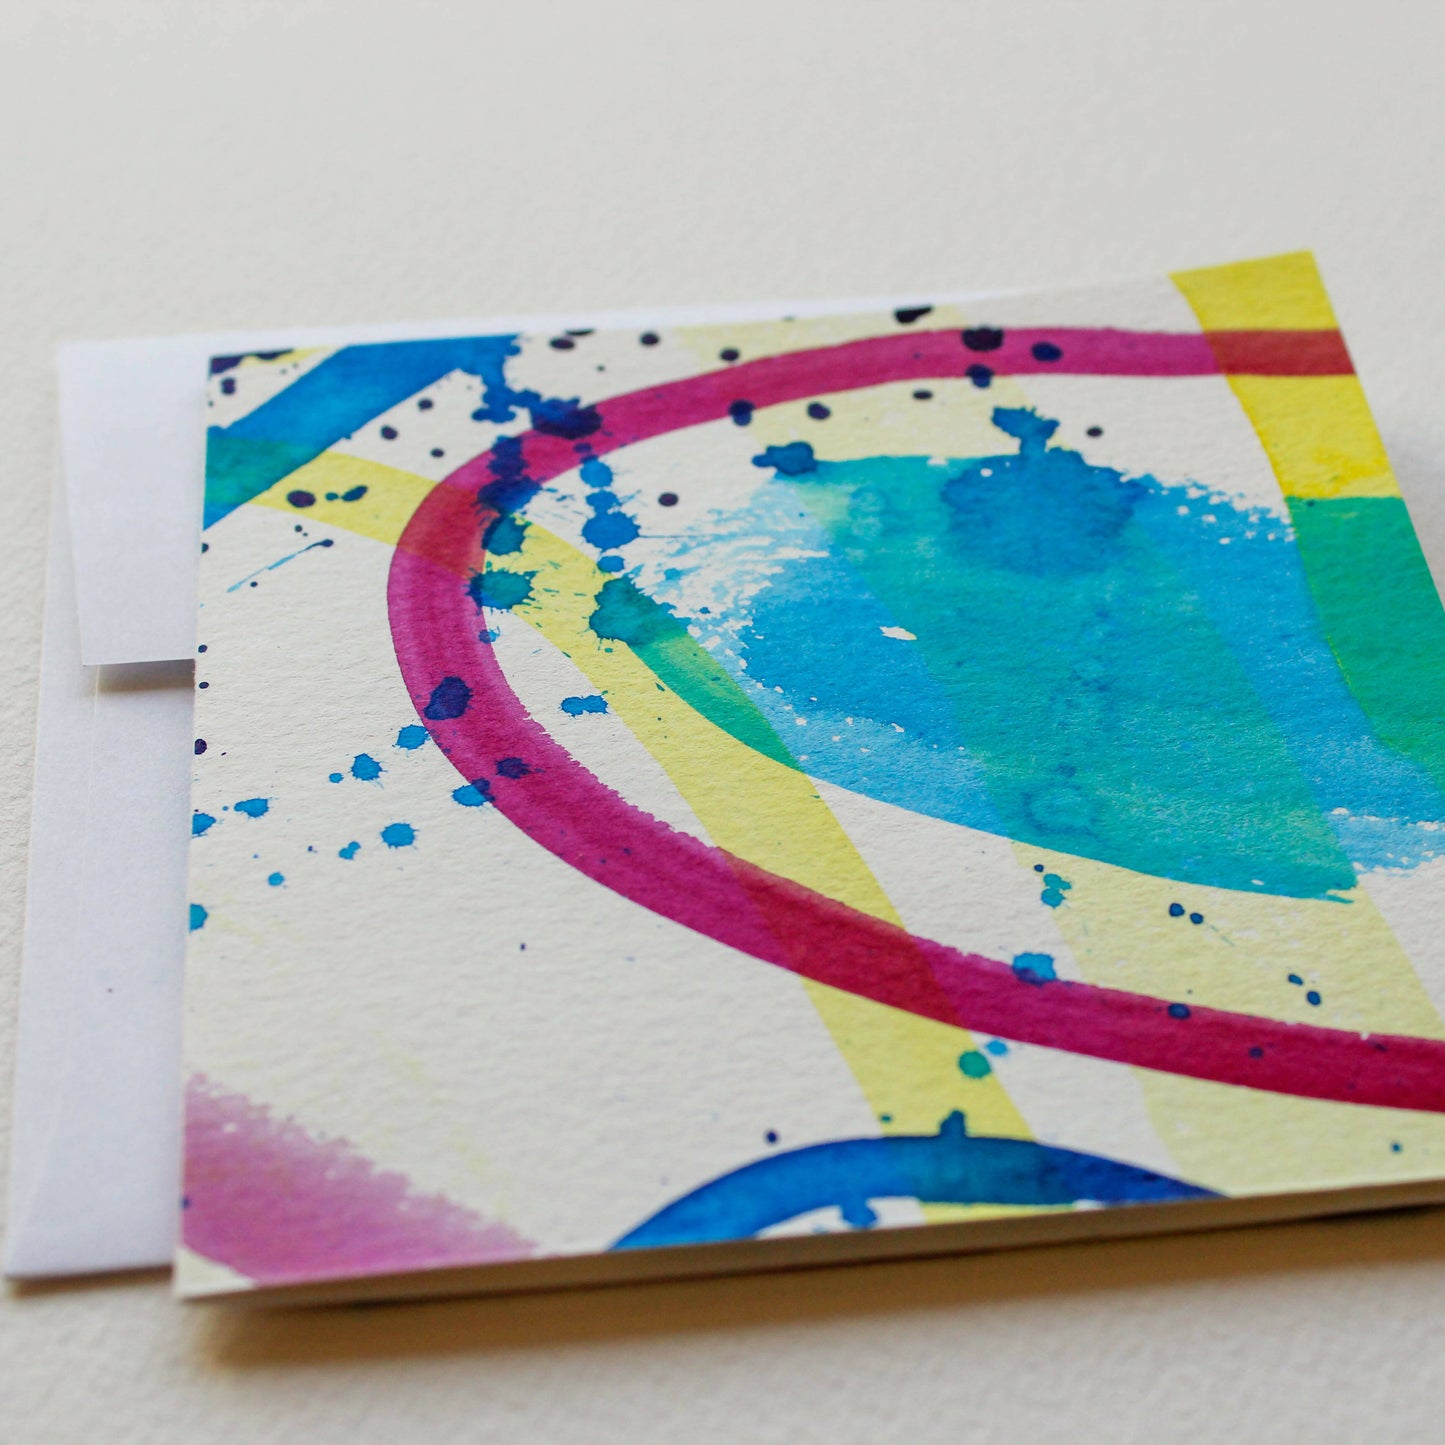 Hand-painted Greeting Card